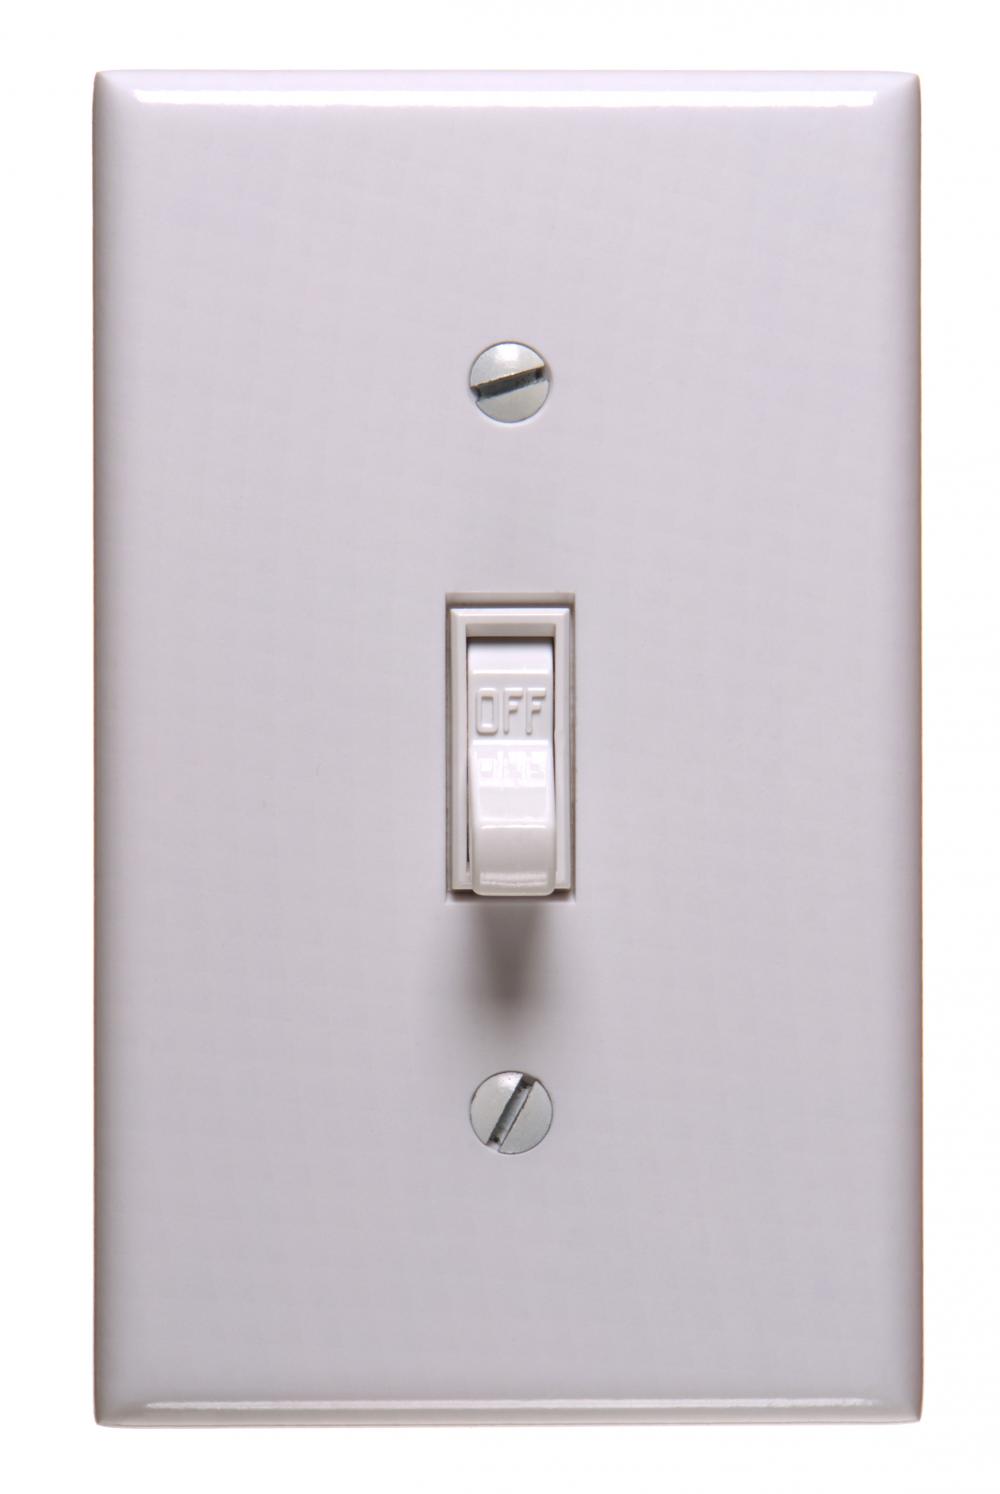 High Quality light switch off Blank Meme Template